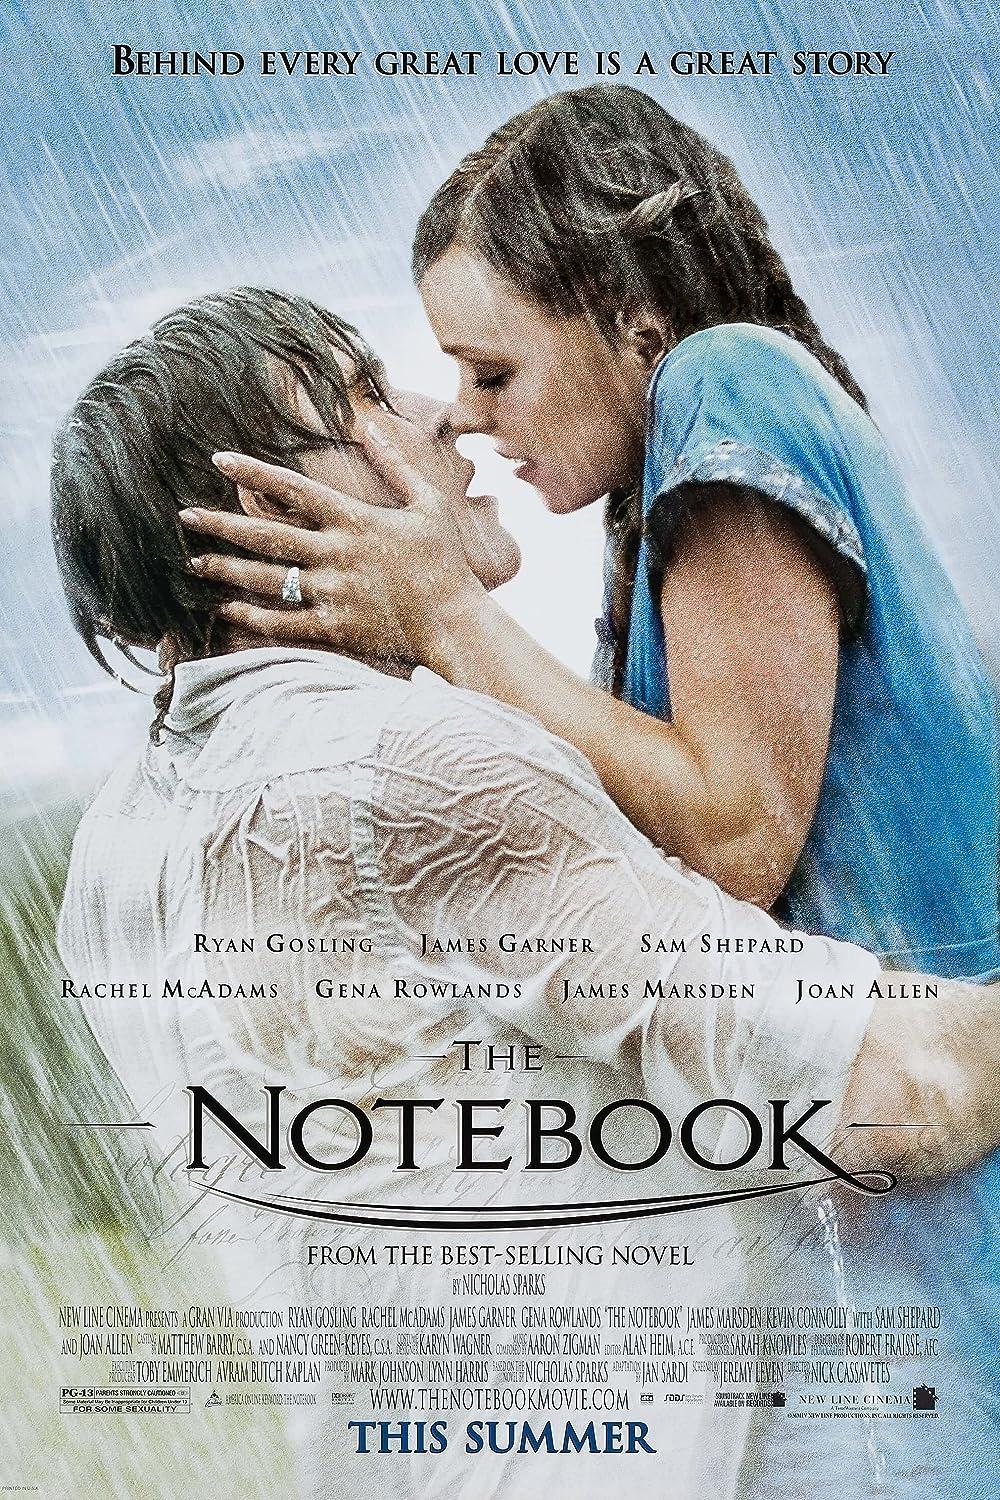 The Notebook is a touching romantic drama set in post-war America, portraying the enduring love between Noah Calhoun (Ryan Gosling) and Allie Hamilton (Rachel McAdams). Their passionate love story unfolds amidst societal challenges of the 1940s, capturing the intensity of first love and the challenges of lasting commitment. Narrated by an elderly Noah to an Alzheimer's-afflicted Allie, the tale is revealed through a notebook.